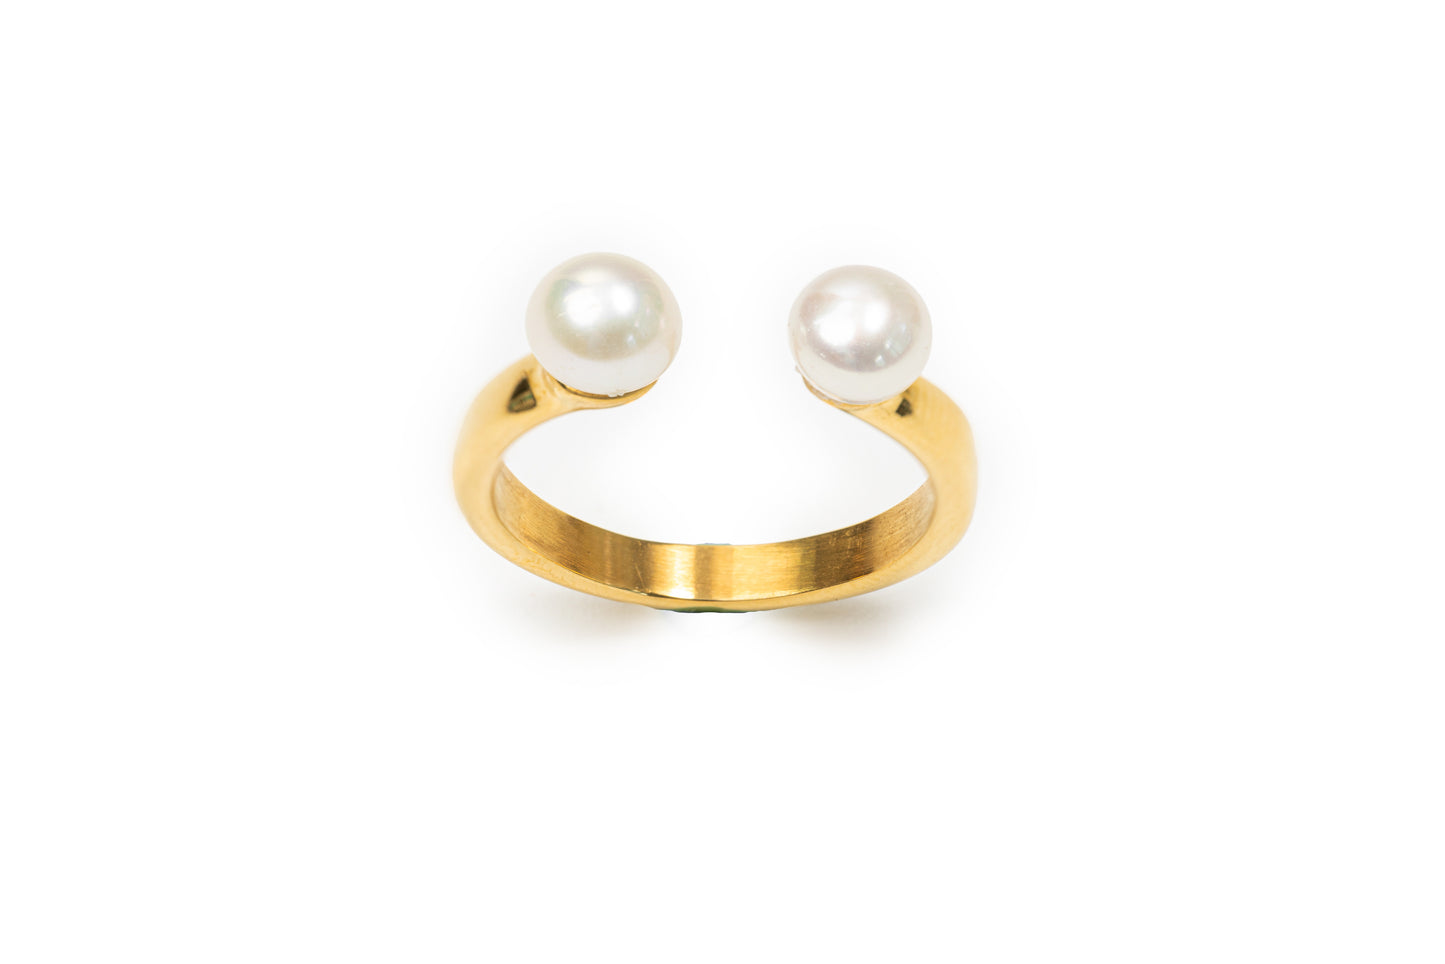 Planderful Golden Ring with Freshwater Pearls - Golden Freshwater Pearl Ring for Women (Gold-Plated Copper)